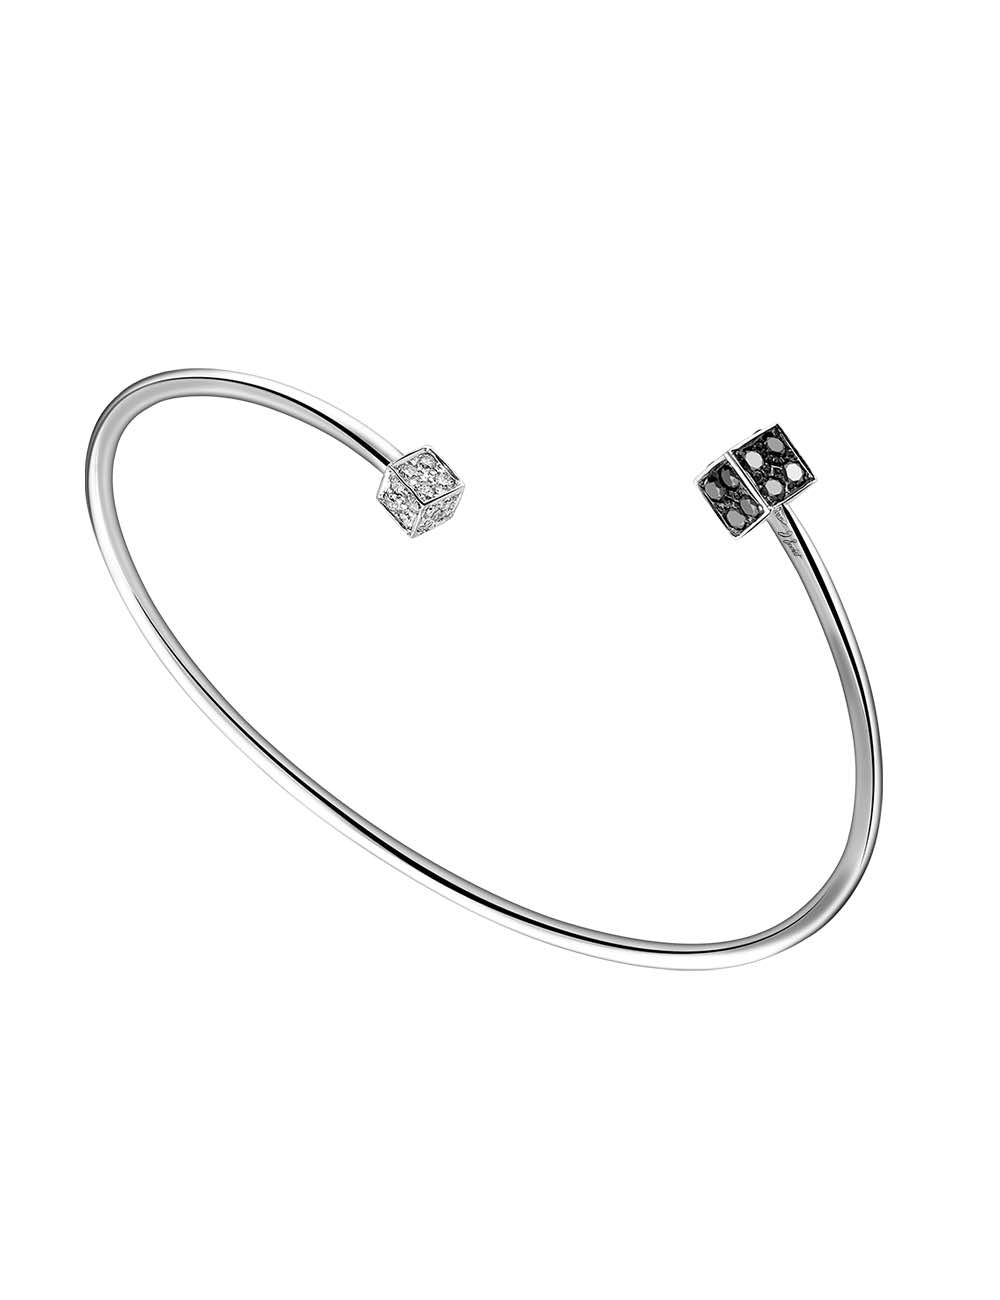 Cube bangle bracelet for women: unique design with contrasting diamonds, bringing sophistication to every outfit.